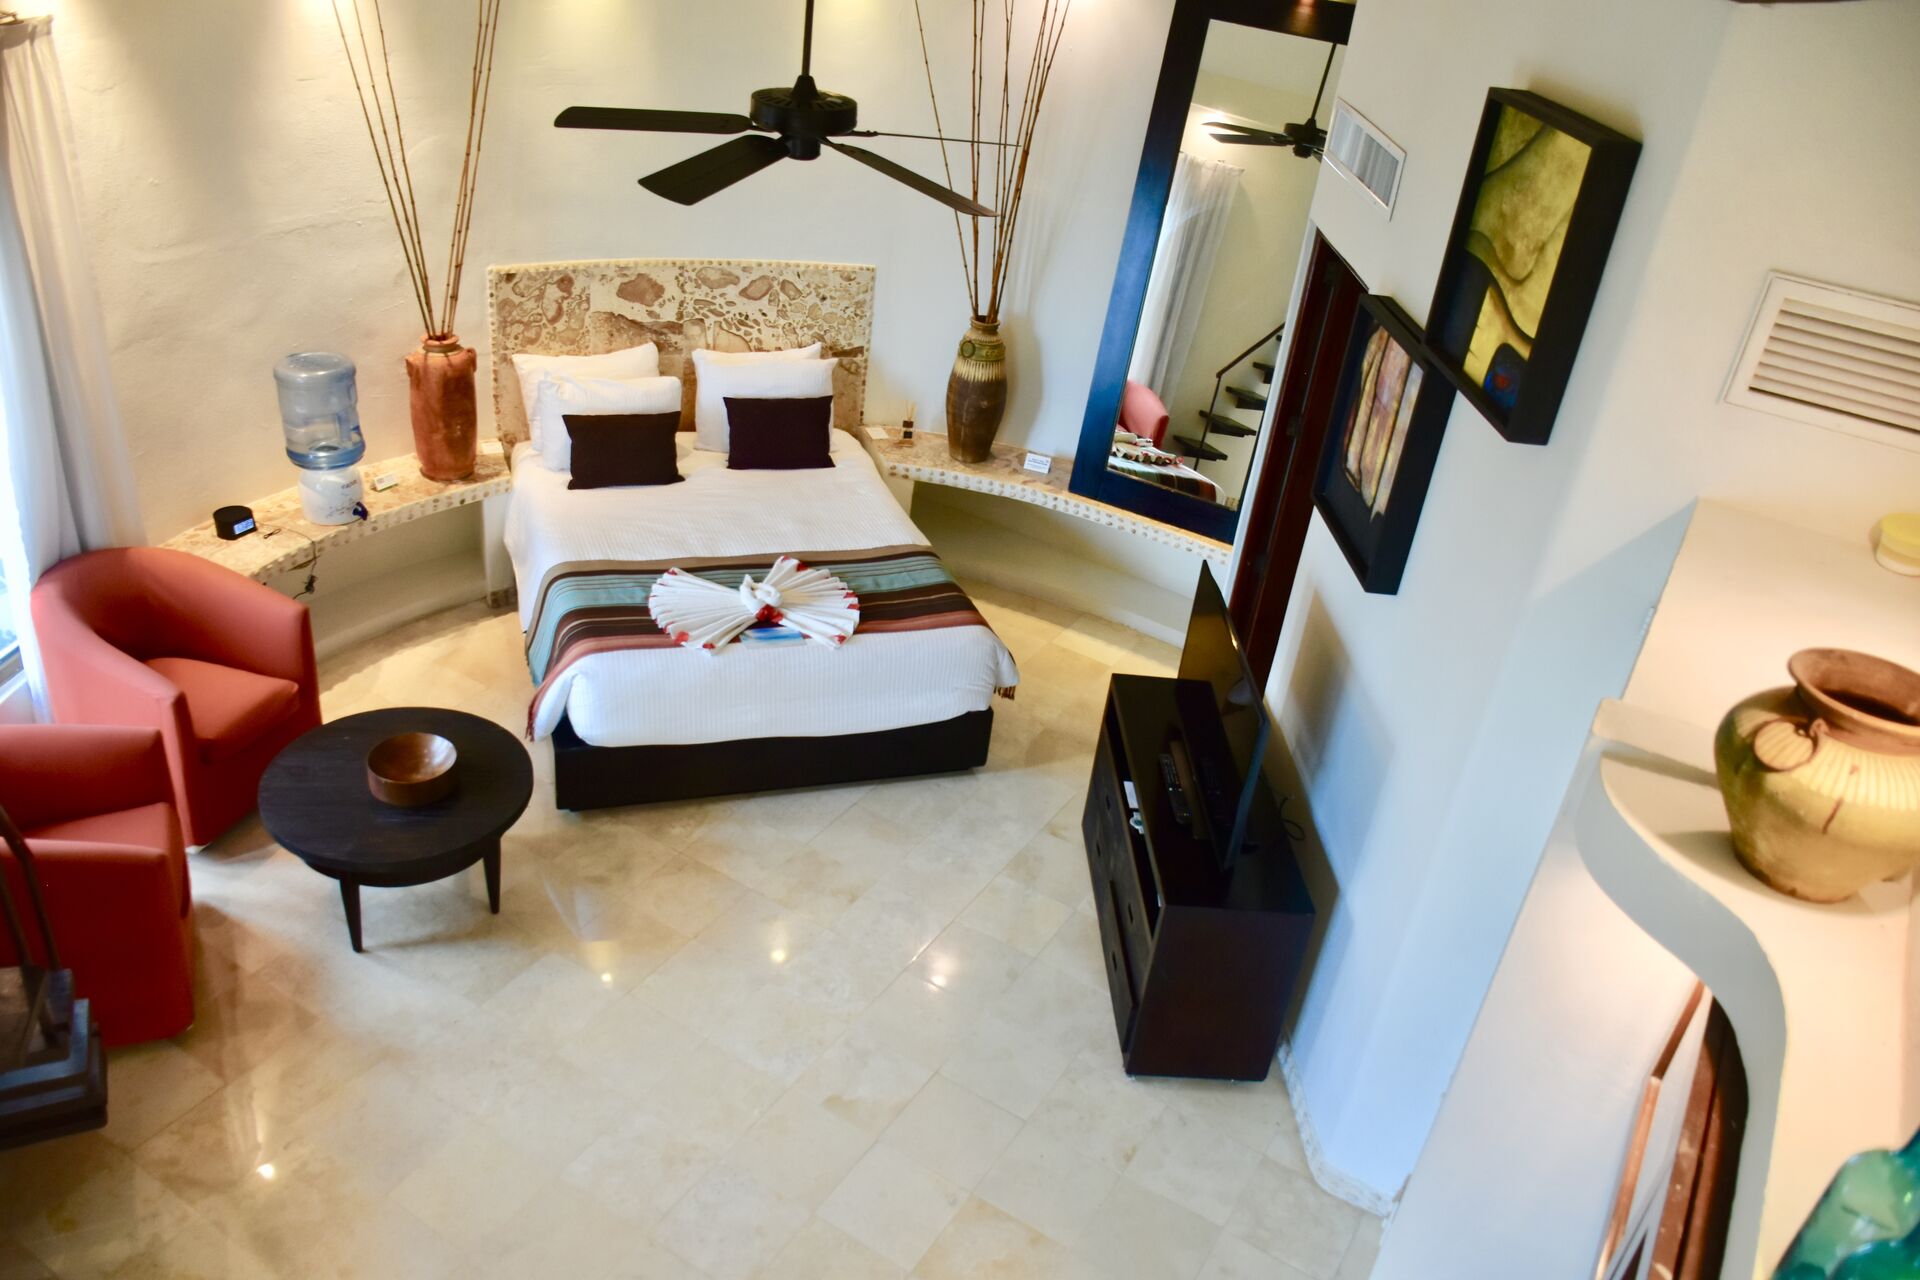 Fully furnished ocean front suite with queen size bed and kitchenette.